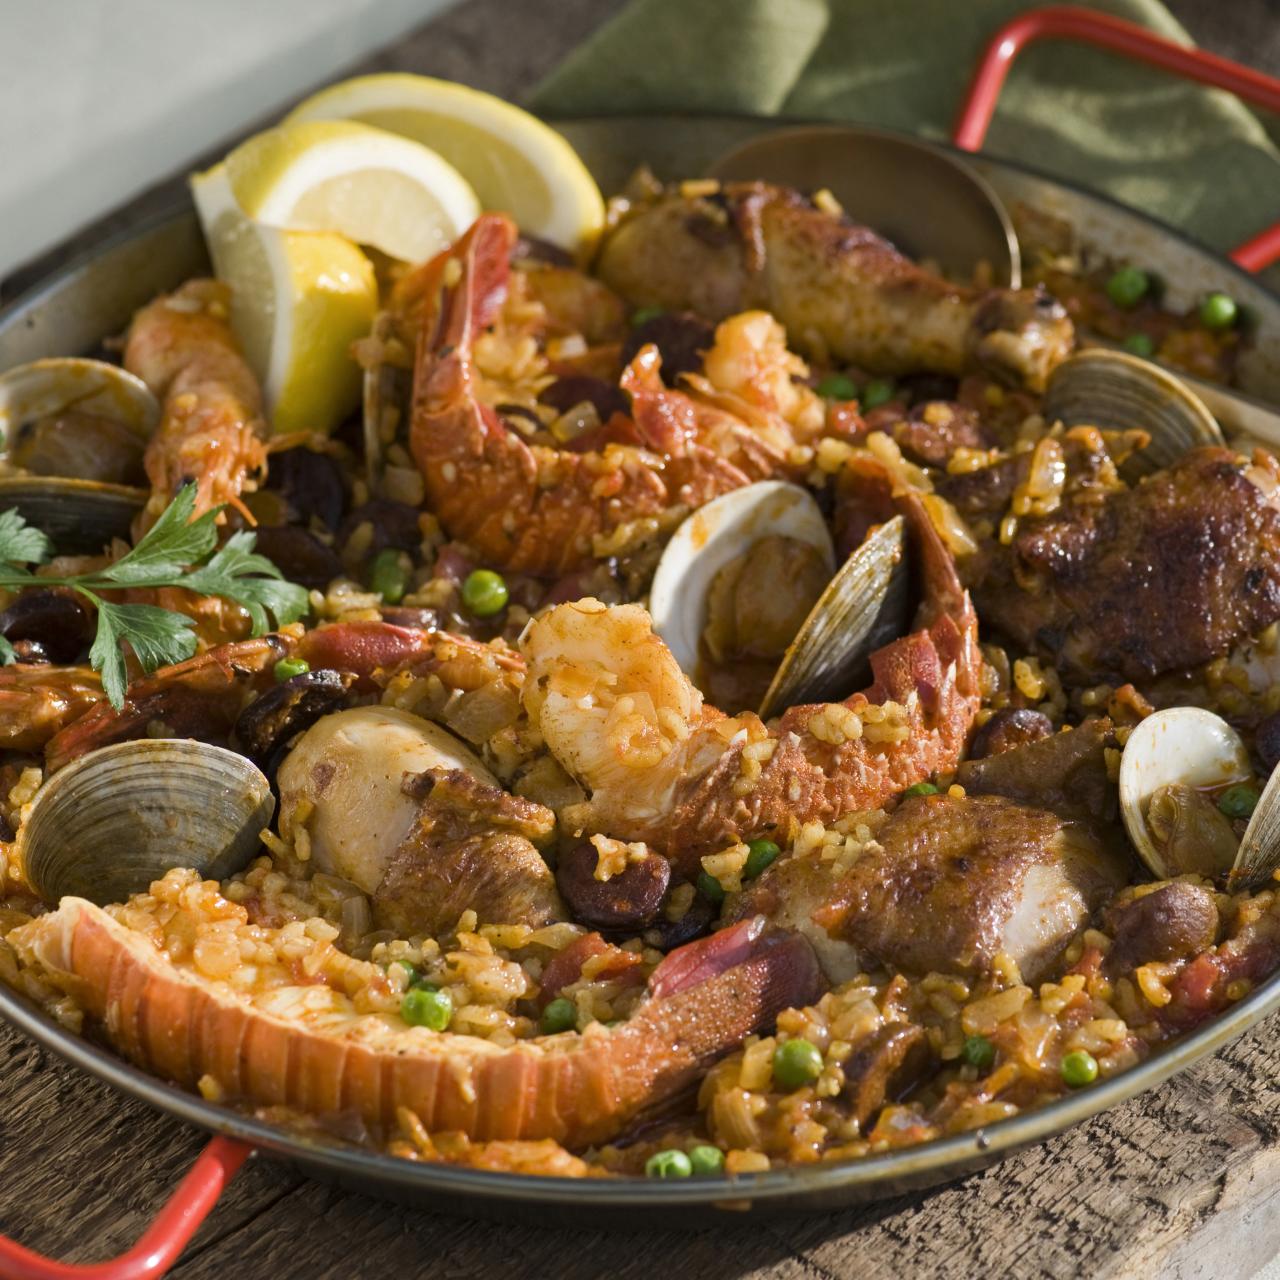 Seafood & Chicken Paella with Peas